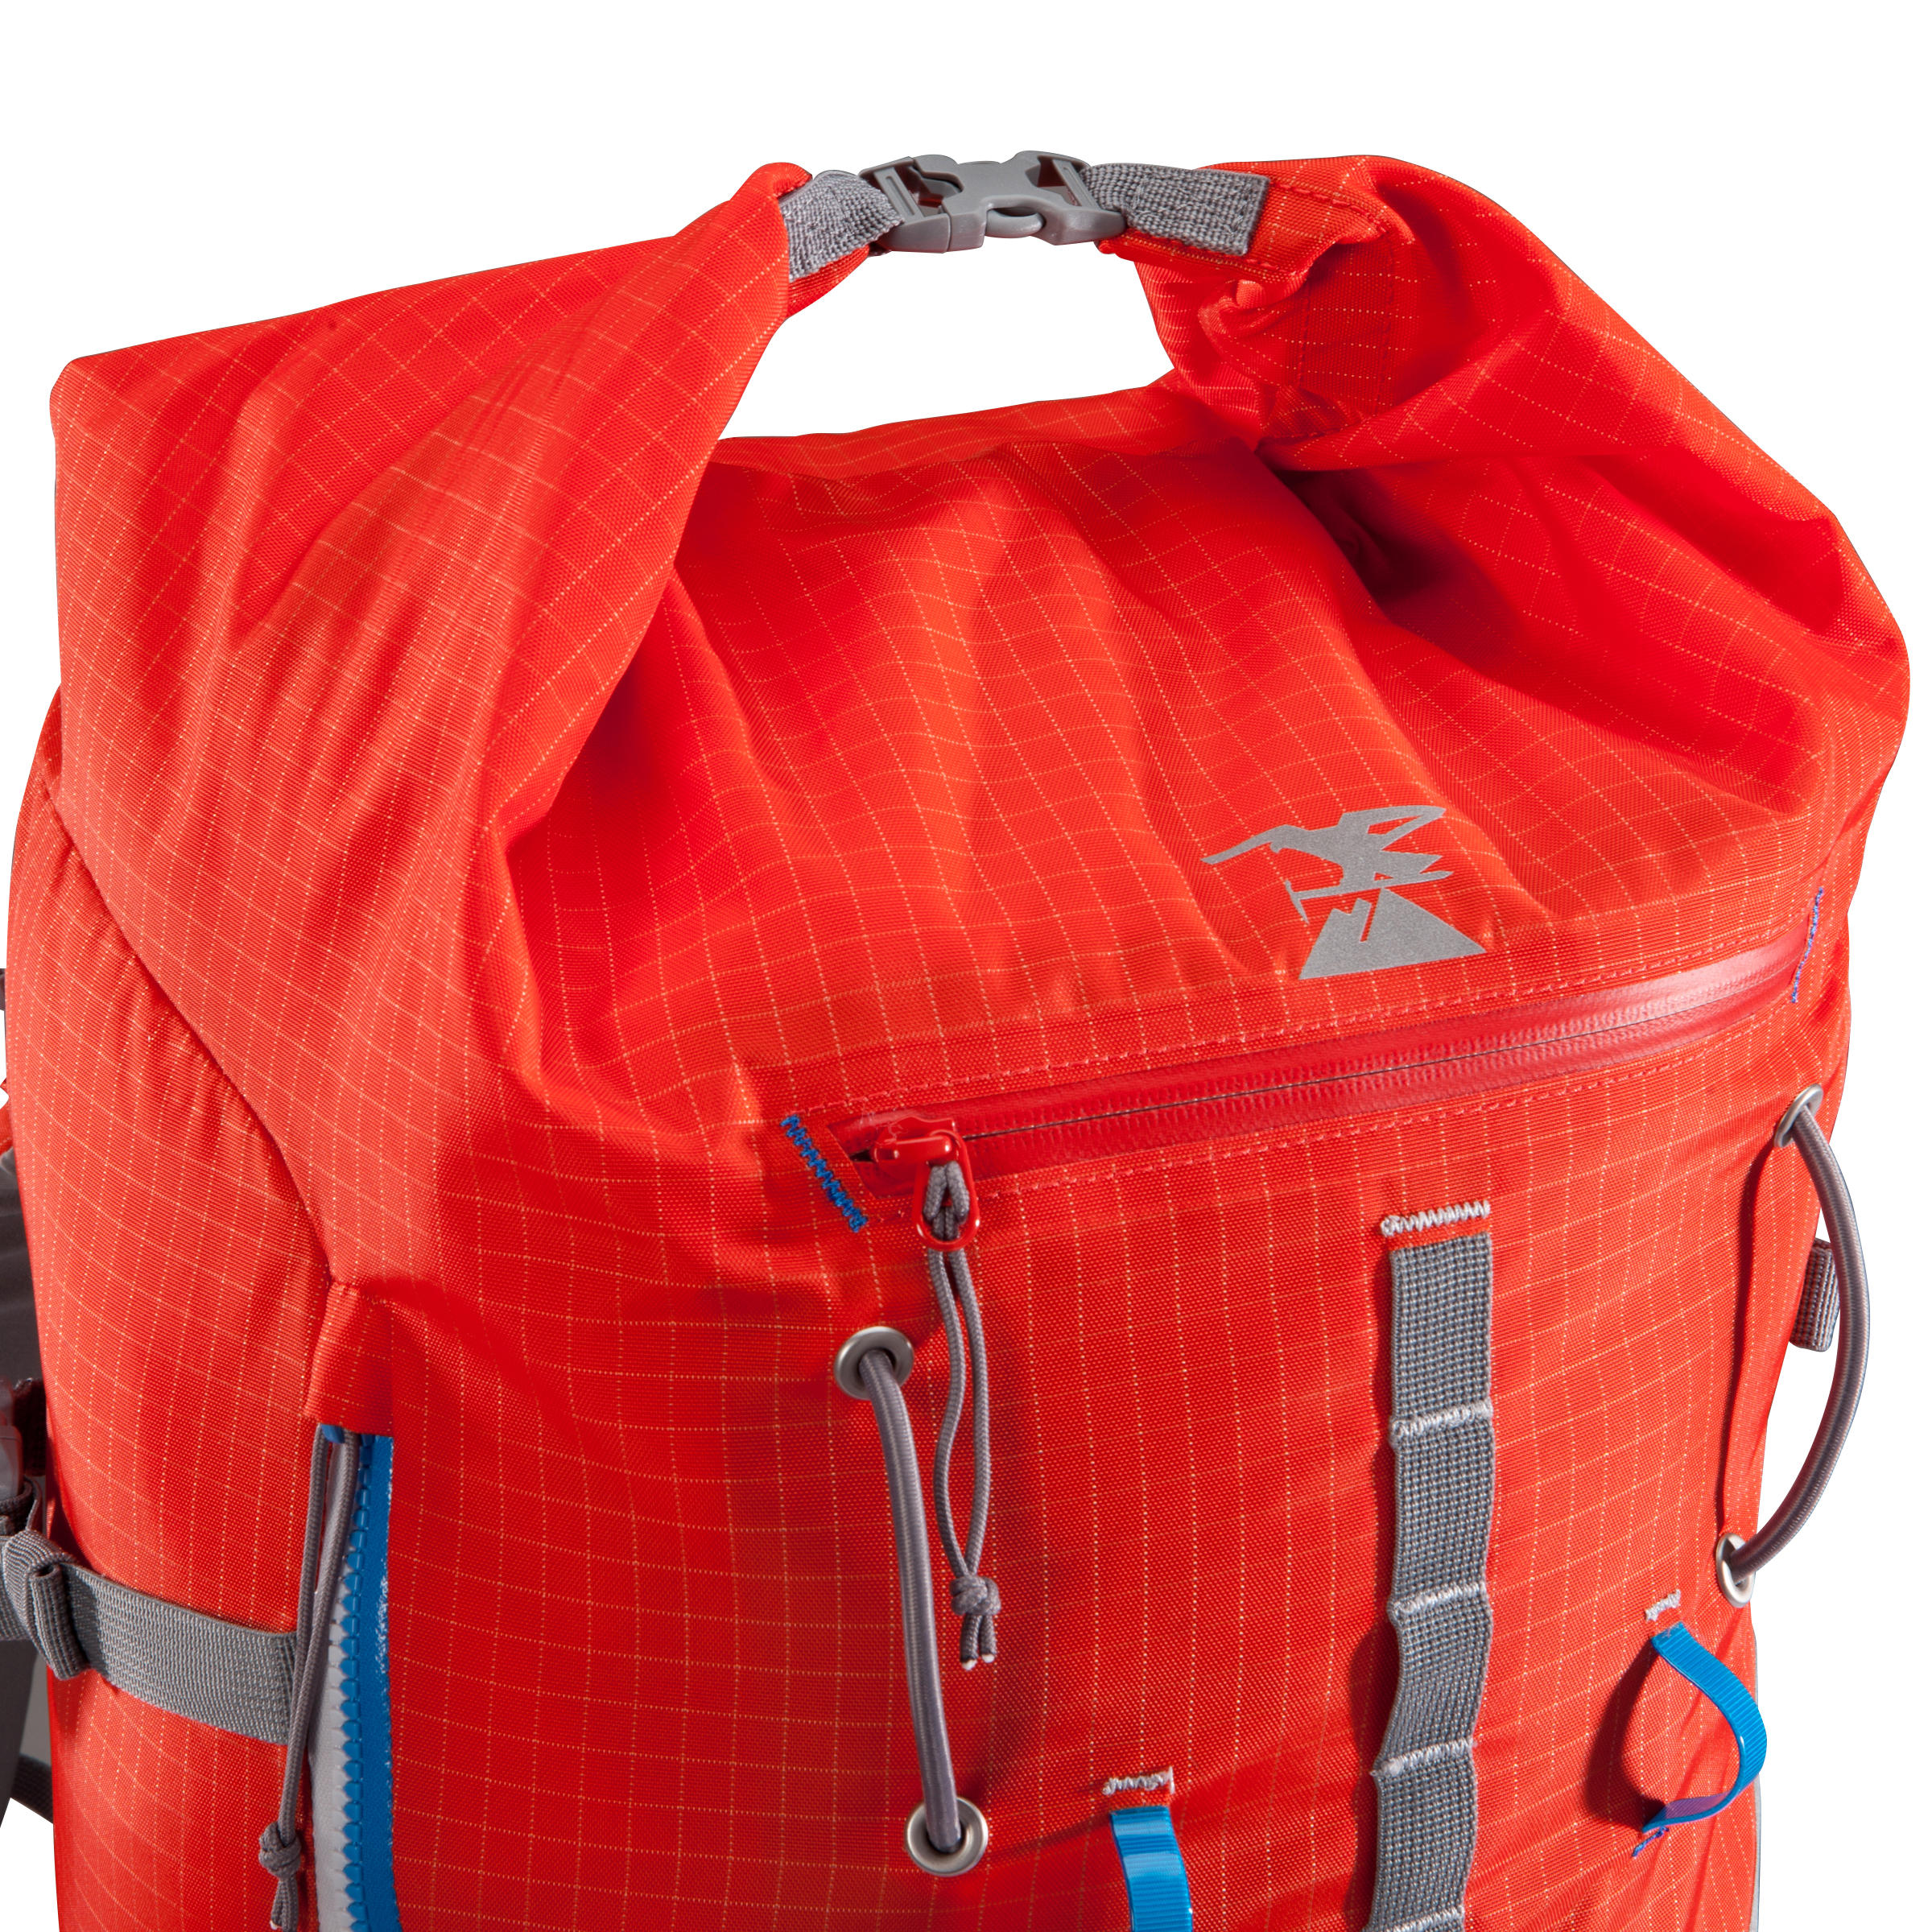 Simond Mountaineering Backpack 70 Litres - Makalu 45/70 Red 70 L Backpack